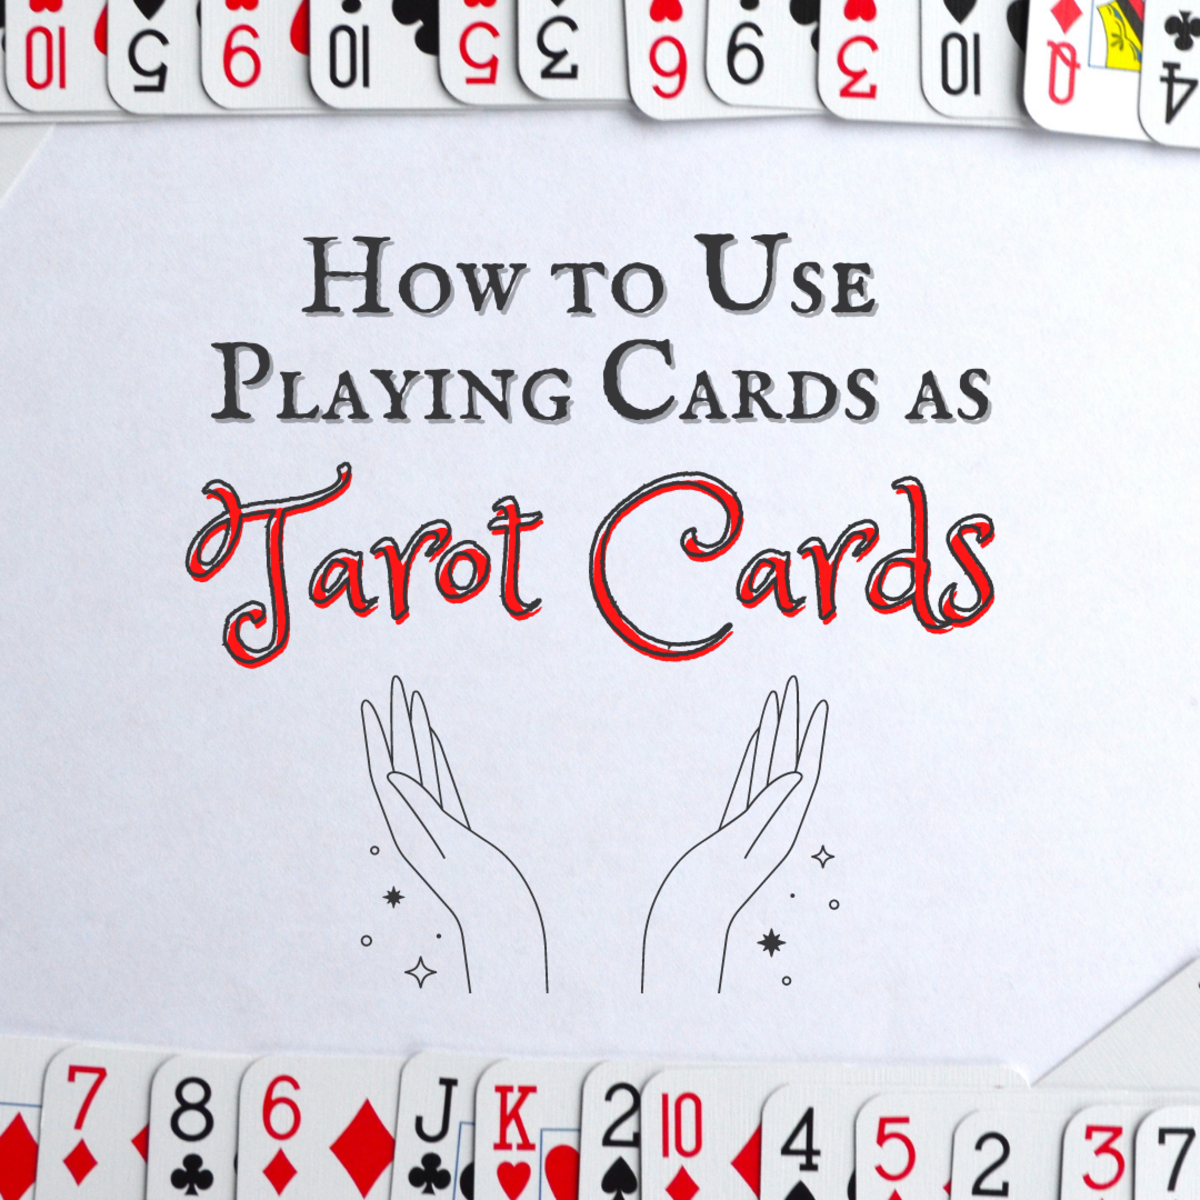 How to use a deck of playing cards for a tarot reading